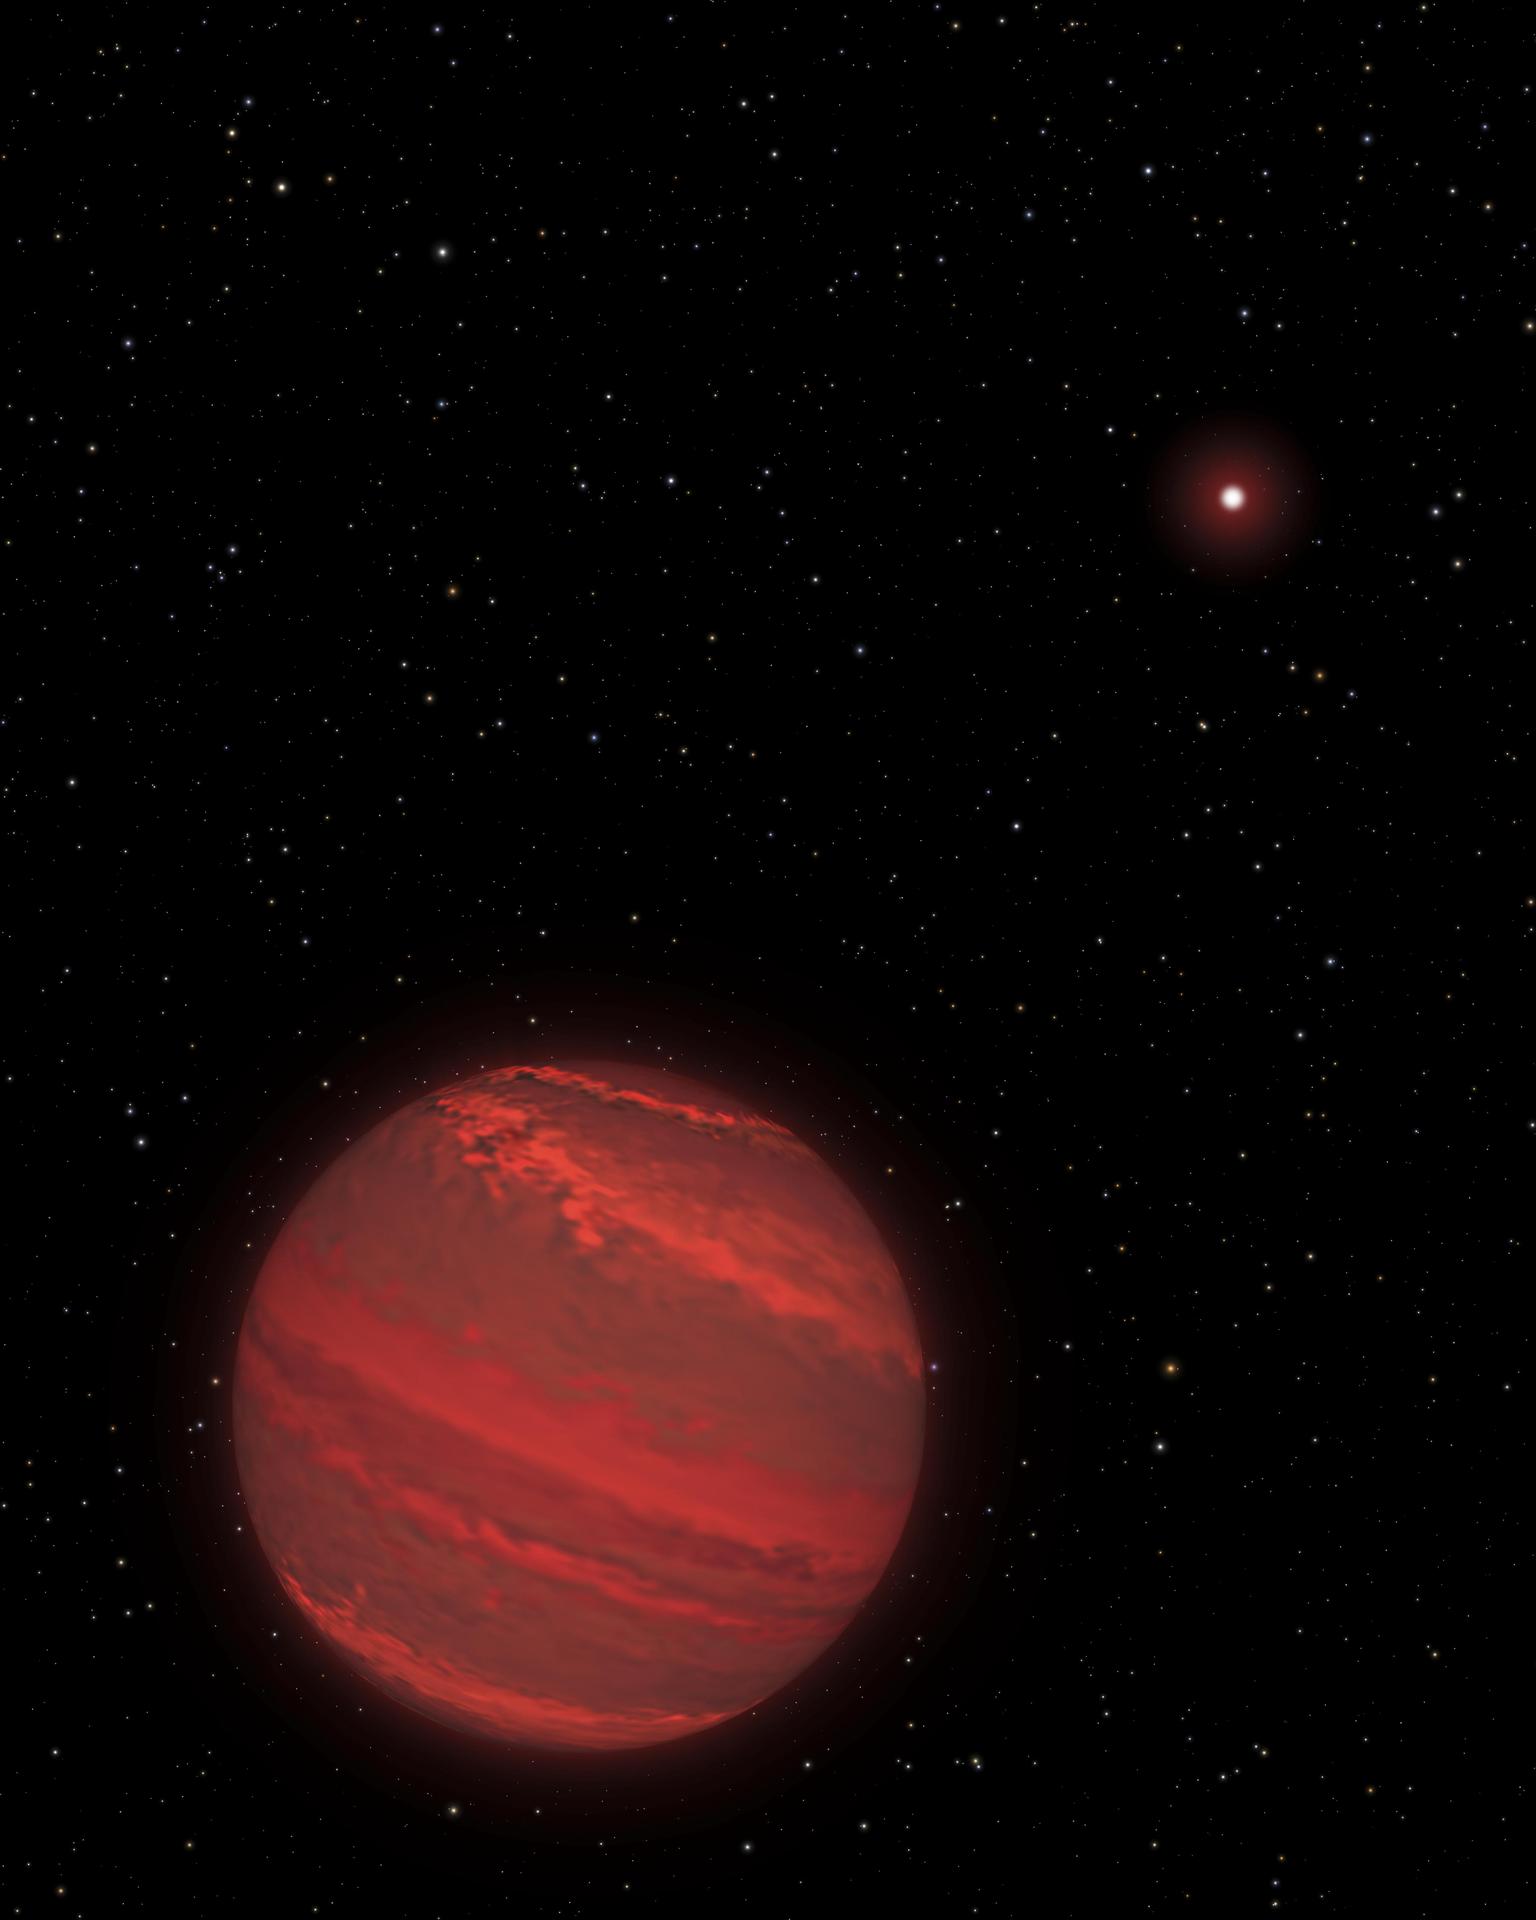 A huge red planet orbiting a small red 'brown dwarf' star